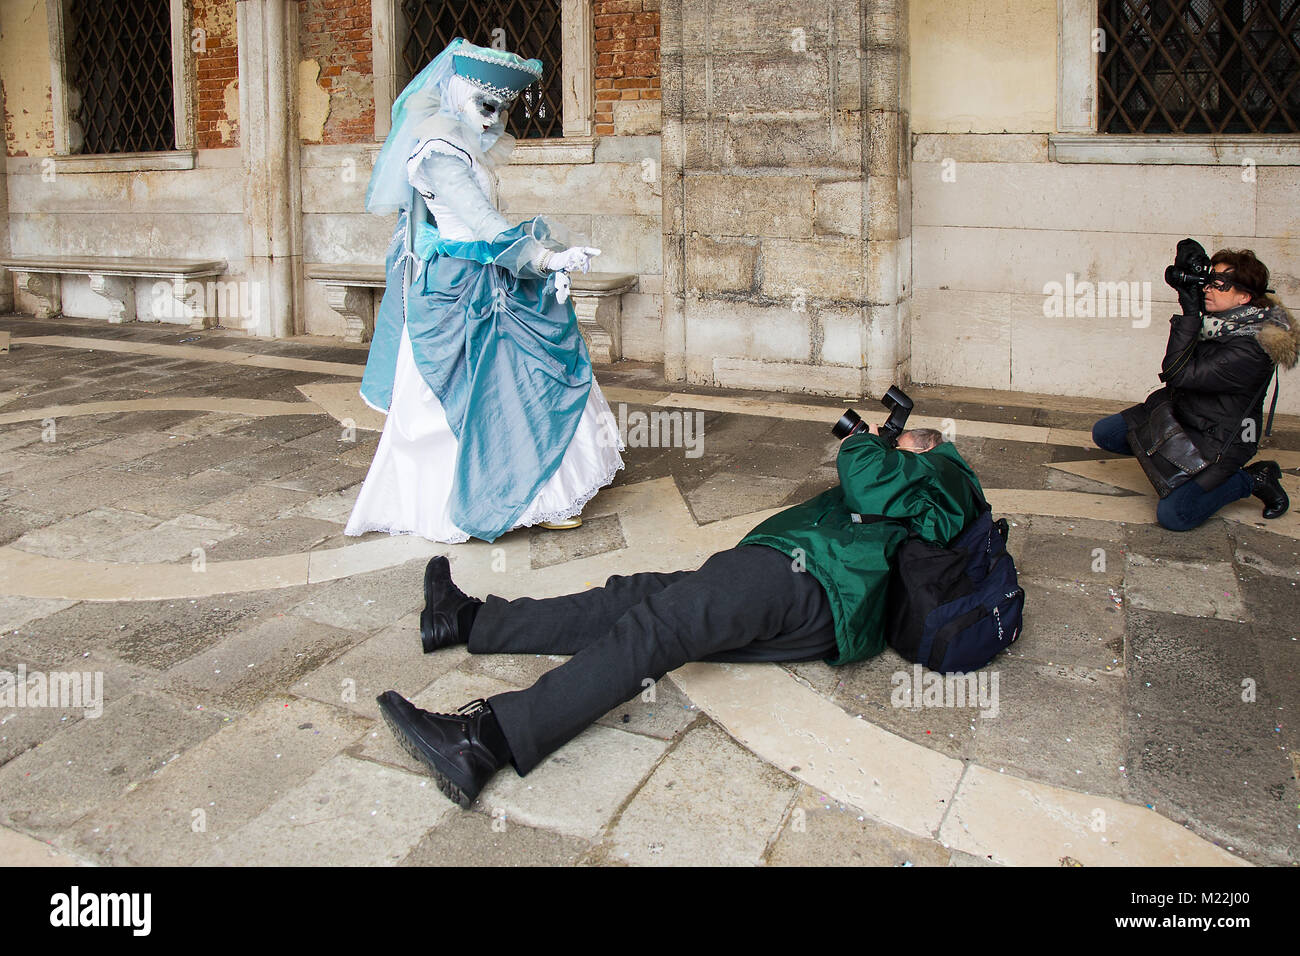 Venice Carnival - Photographer is taking pictures of Venetian mask lying on the floor with DSLR camera, St. Mark's Square in Venice. Stock Photo